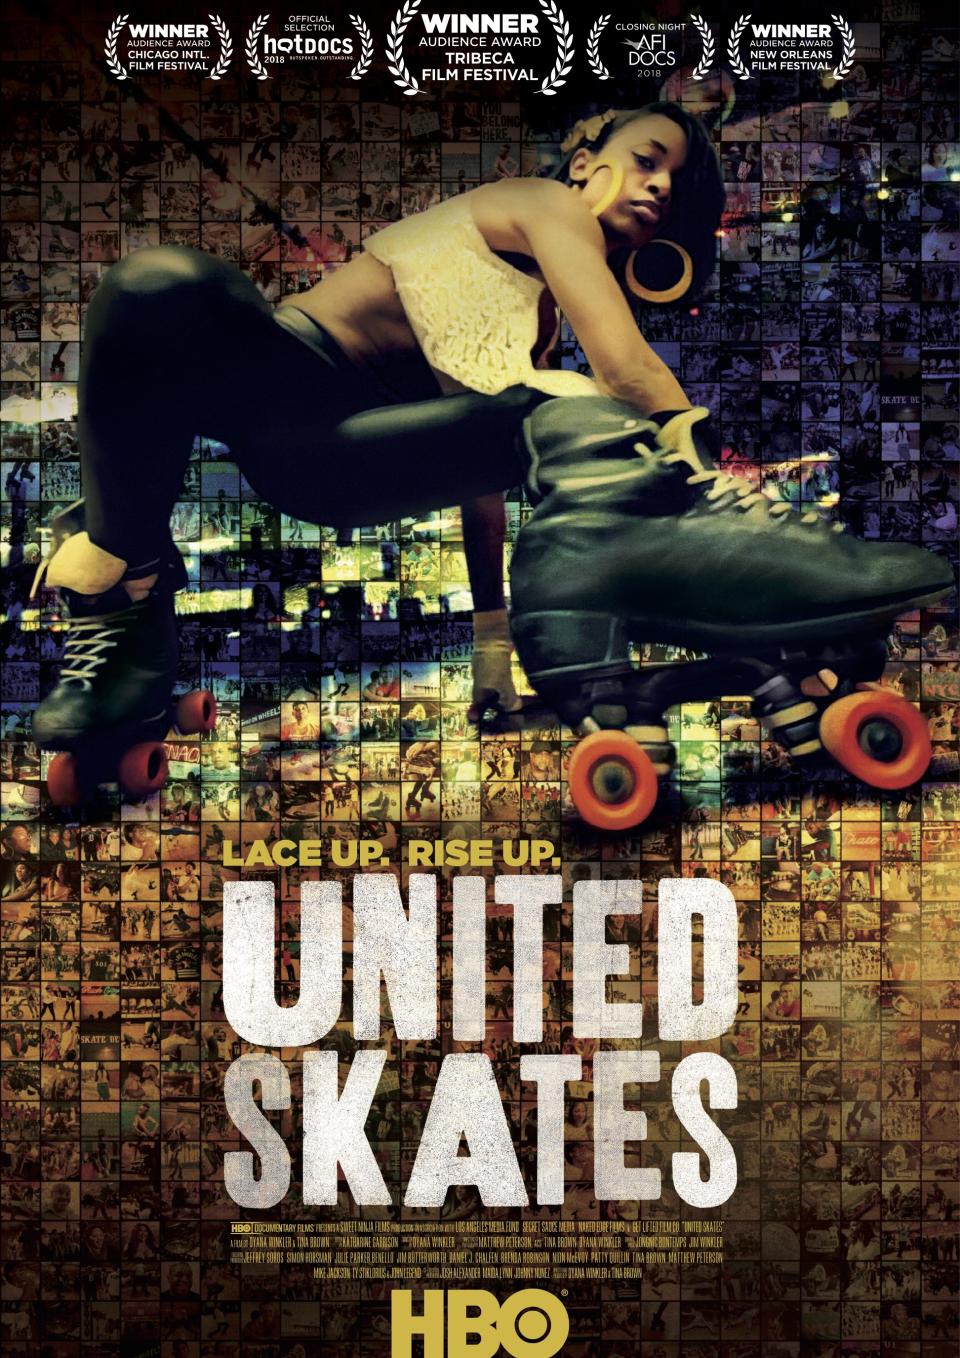 An African American woman leans low on a pair of roller skates atop a series of indistinguishable photos creating a color gradient in the background. The title "Lace Up. Rise Up. United Skates" is positioned above the HBO logo.